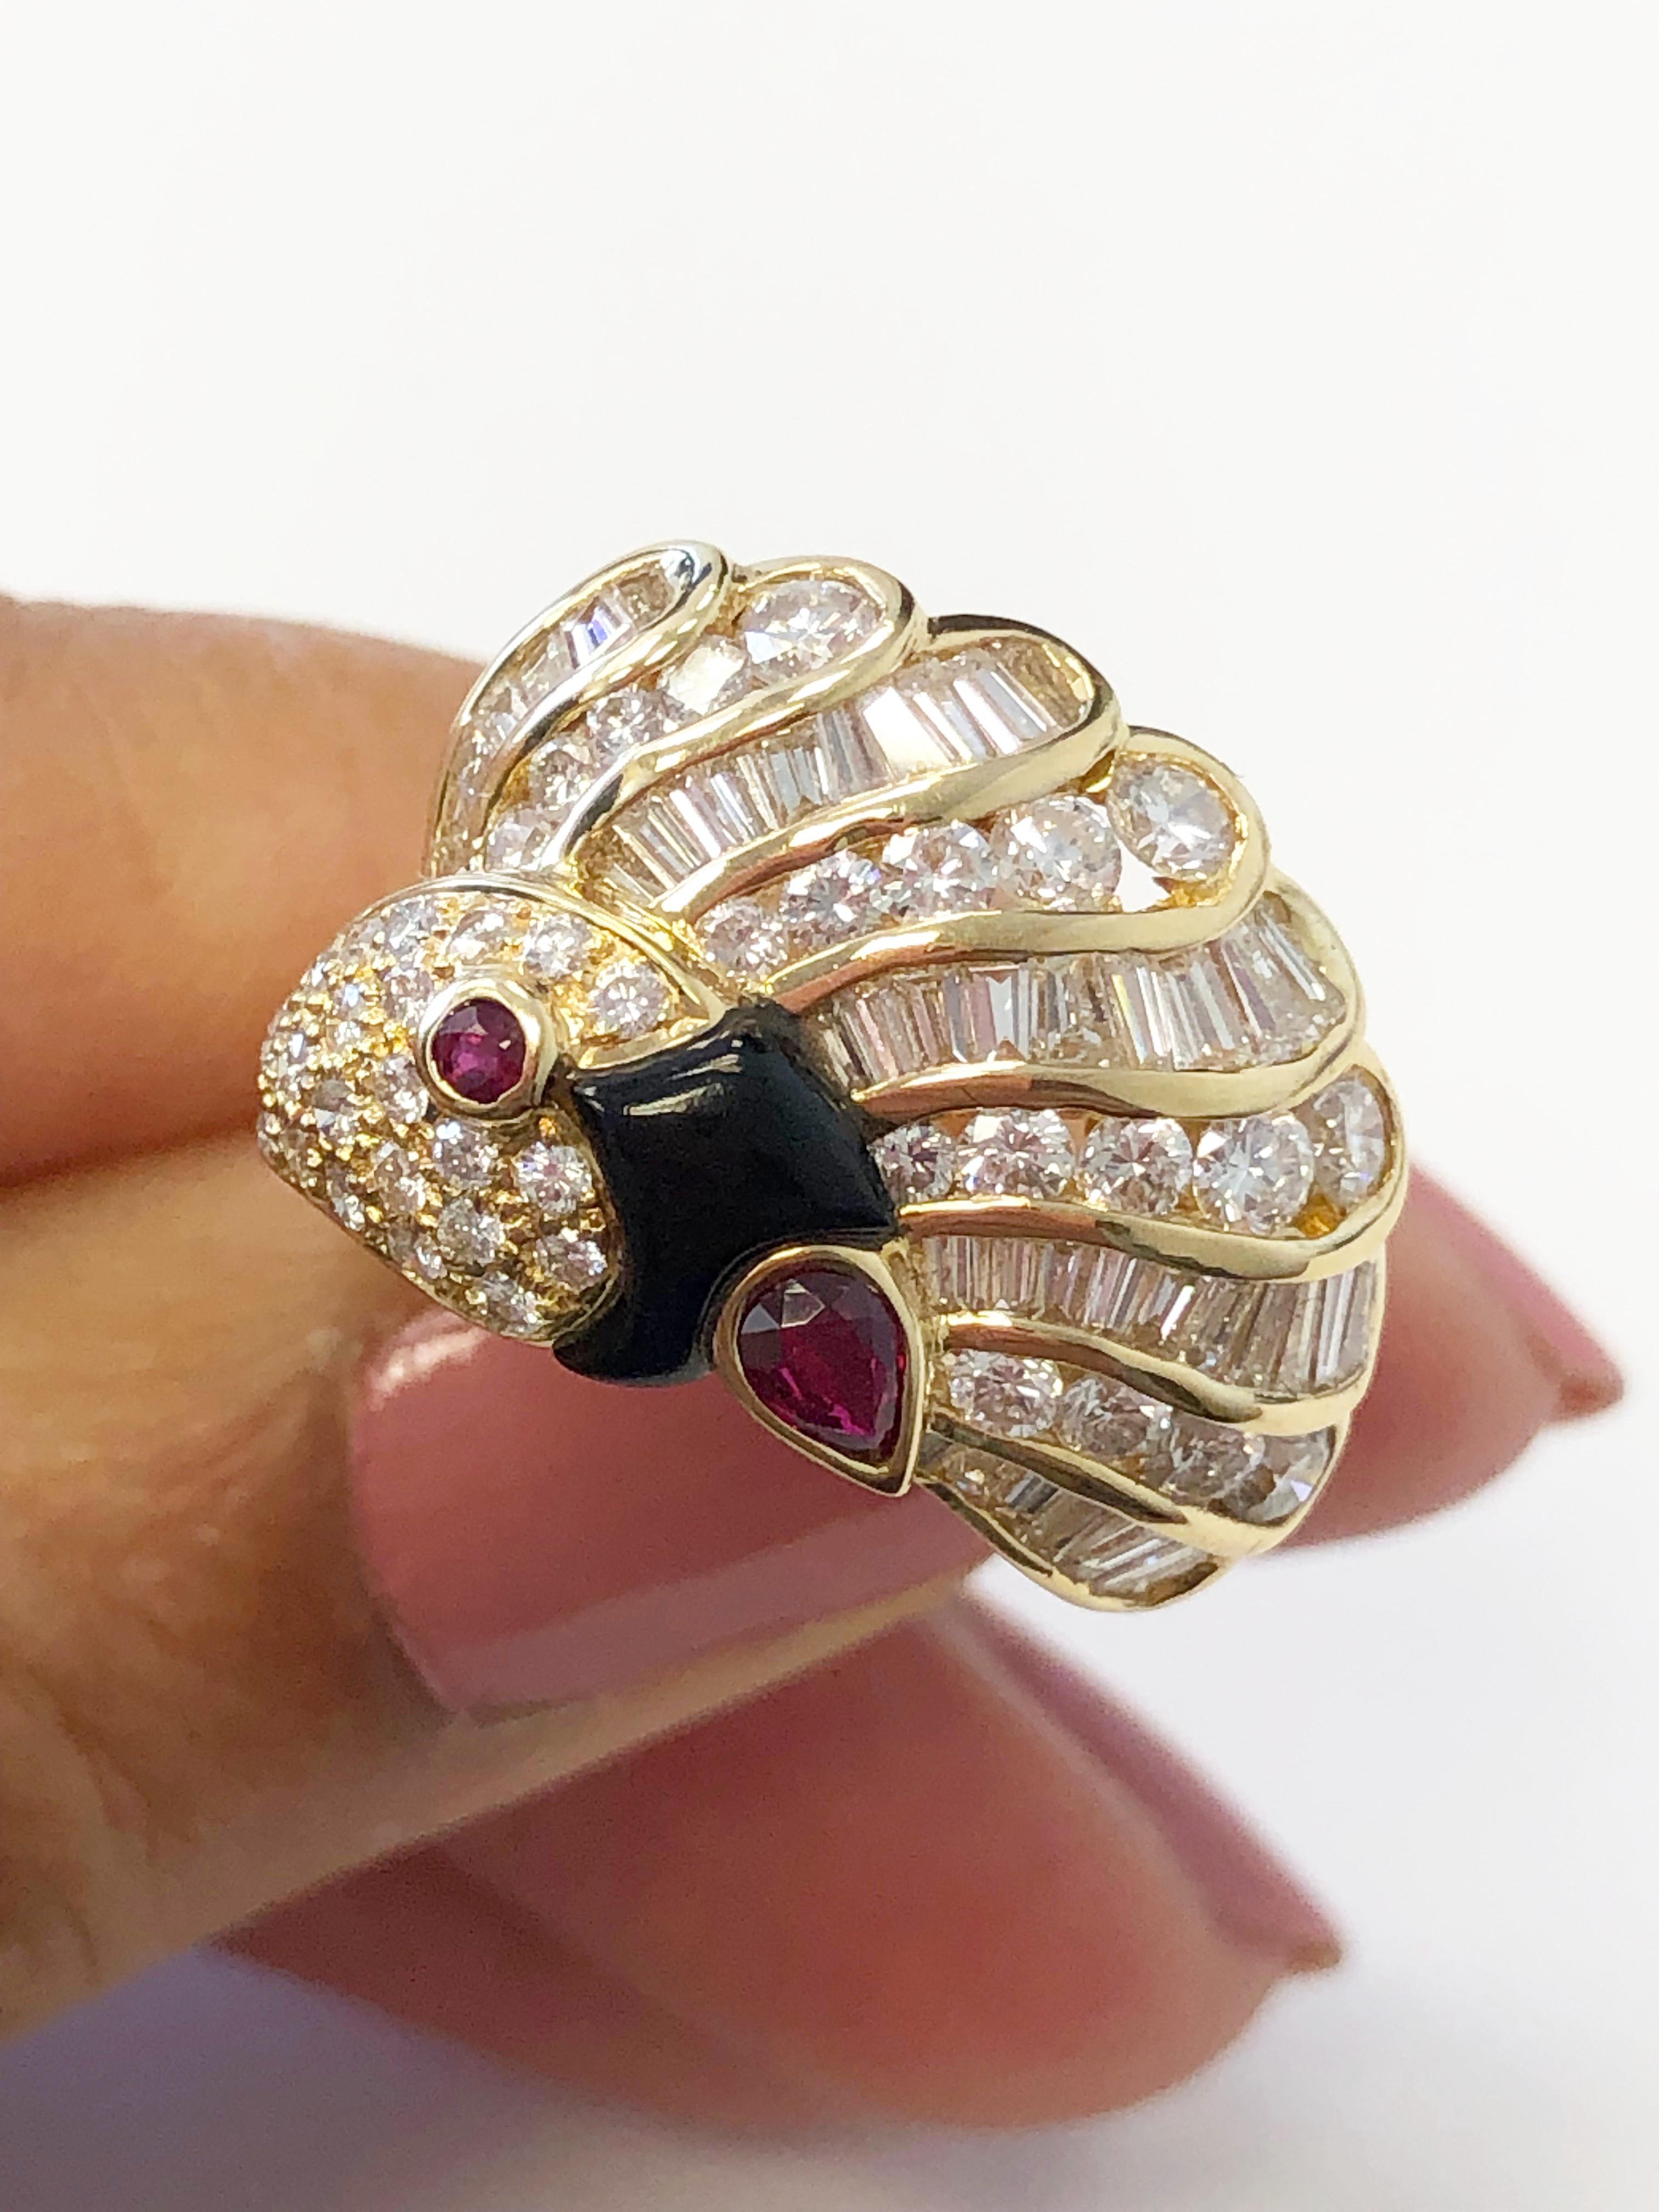 Stunning 1.15 carat good quality white diamond rounds and baguettes with 0.15 carats of ruby pear and round.  Onyx detailing and unique peacock design handcrafted in 18k yellow gold in size 6.5.  Such a fun piece to add to any collection!
 